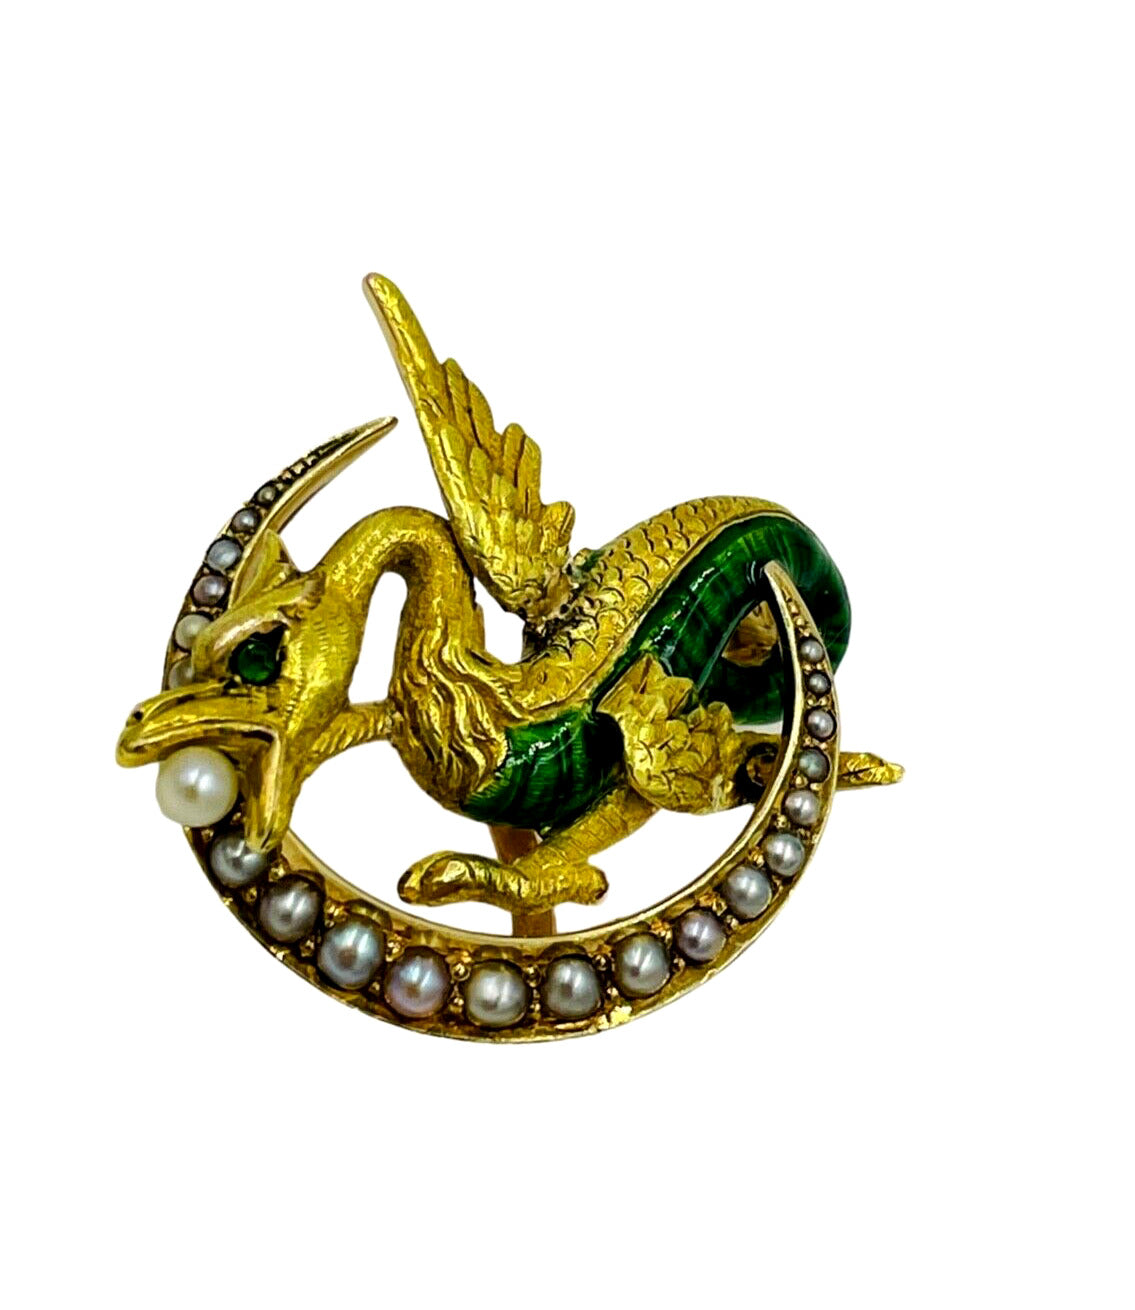 Antique Art Nouveau 14k Winged Dragon/Griffin Pin, Pearls, Green Eye